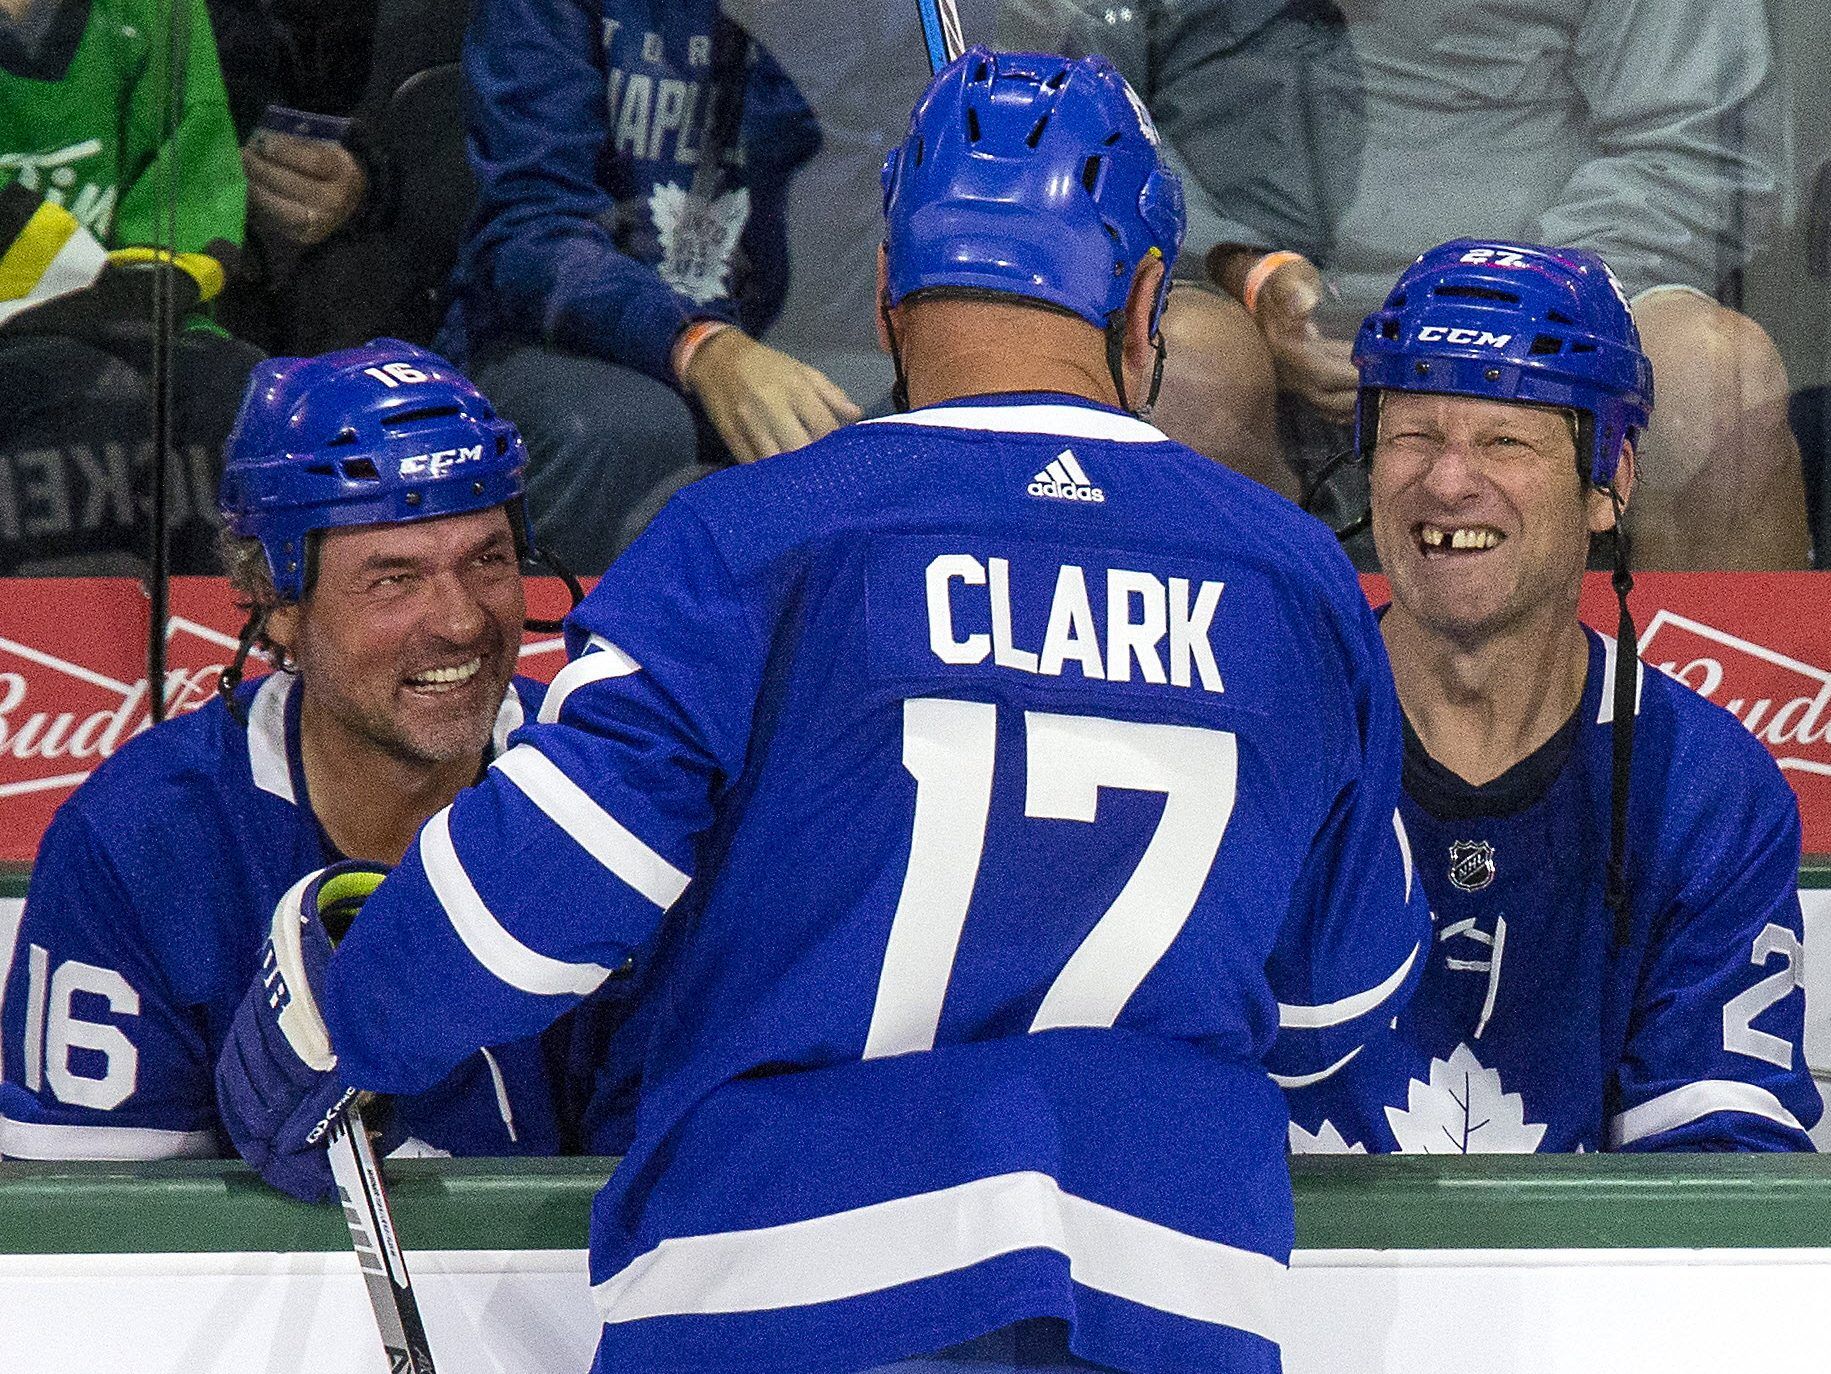 Toronto Maple Leafs alumni host game in London, Ont. to stand